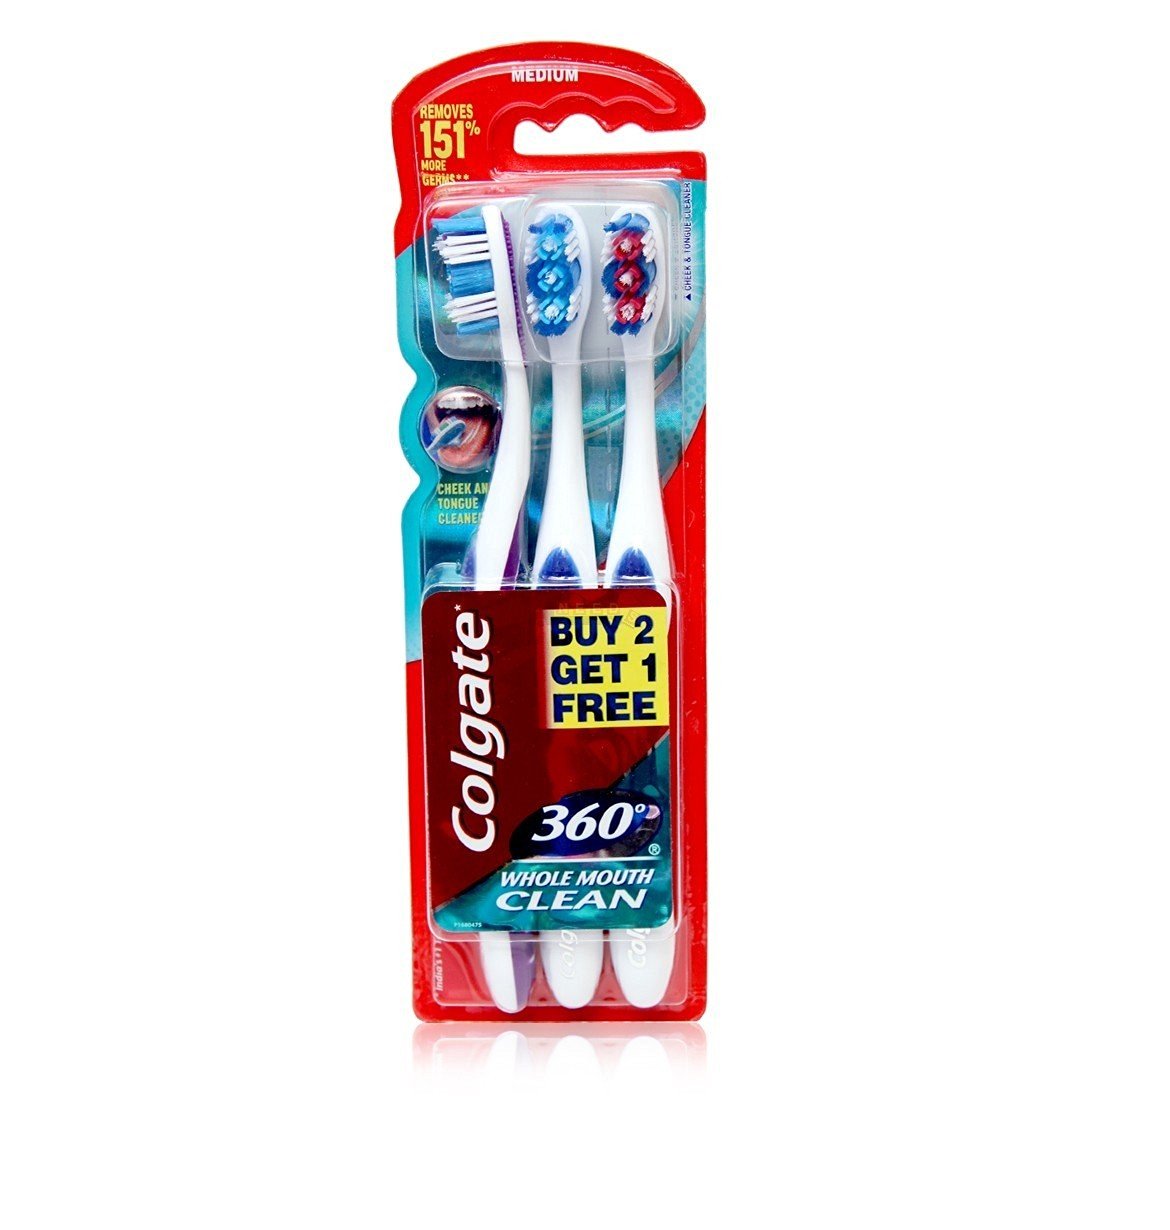 Colgate 360 Whole Mouth Clean Toothbrush (Buy 2 get 1 Saver) in Just Rs.84